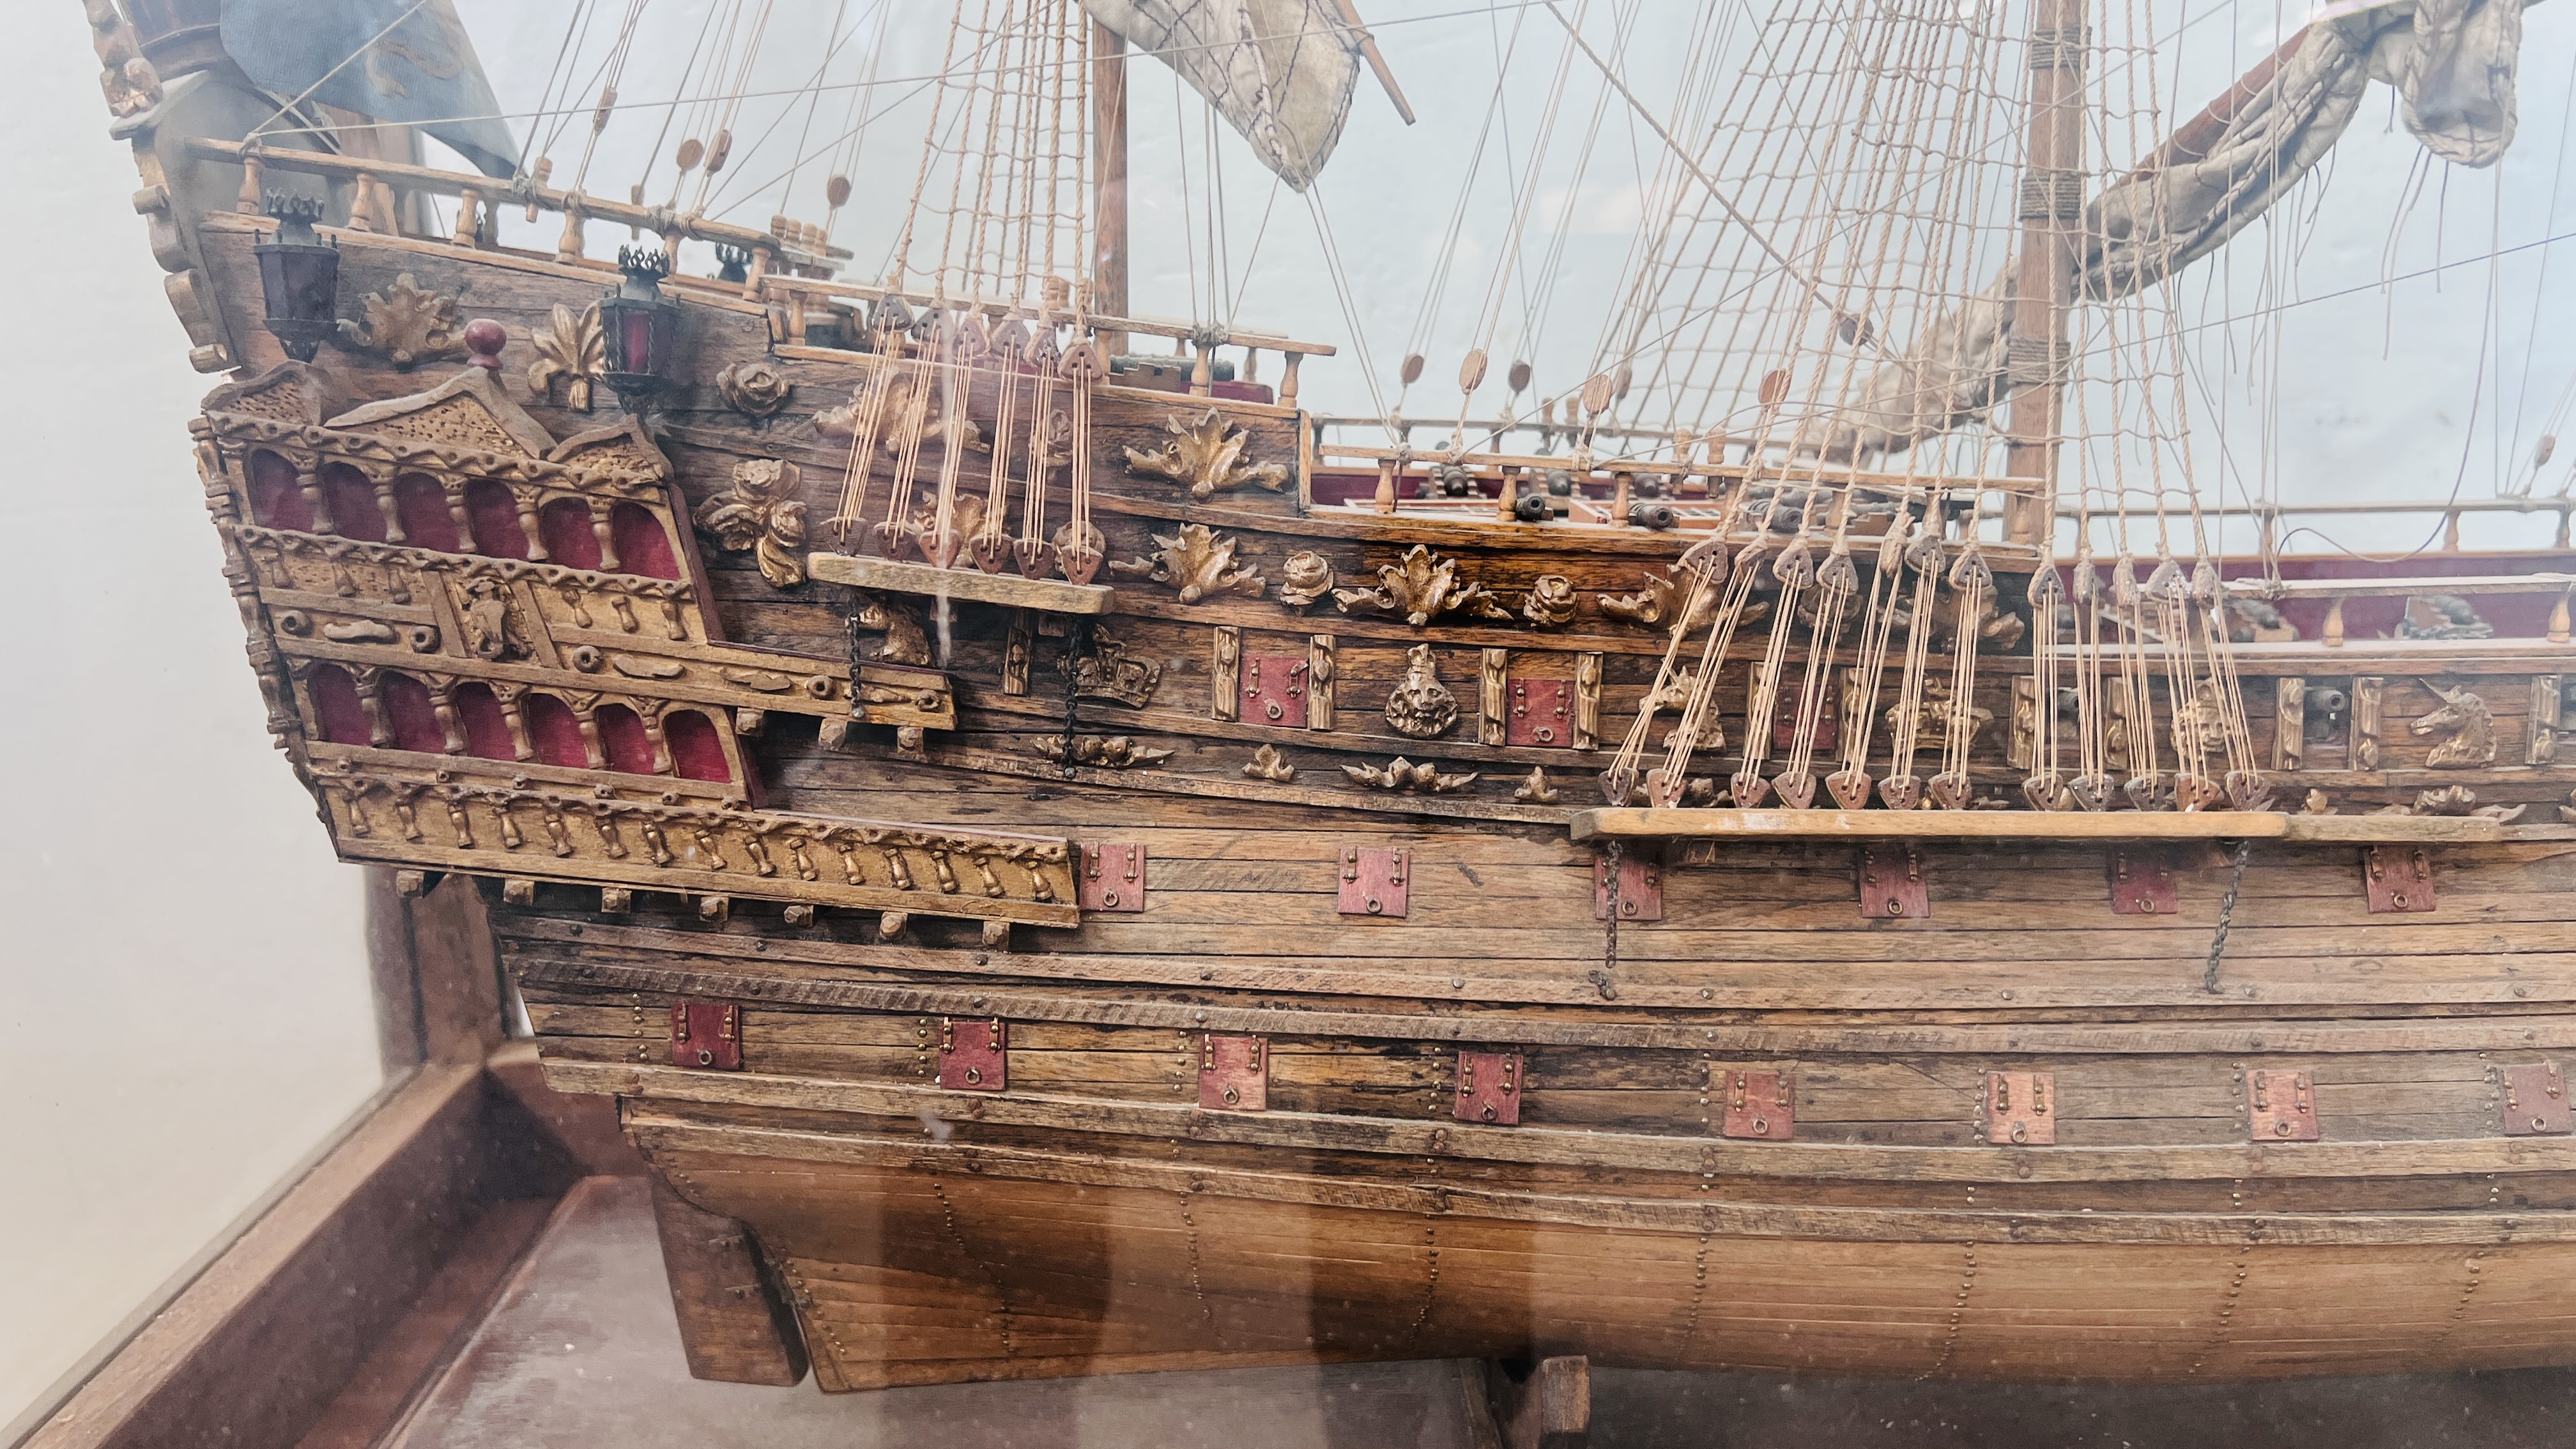 LARGE MODEL GALLEON "SOVEREIGN OF THE SEA" IN MAHOGANY DISPLAY CASE - W 128CM. D 55CM. H 146CM. - Image 8 of 15